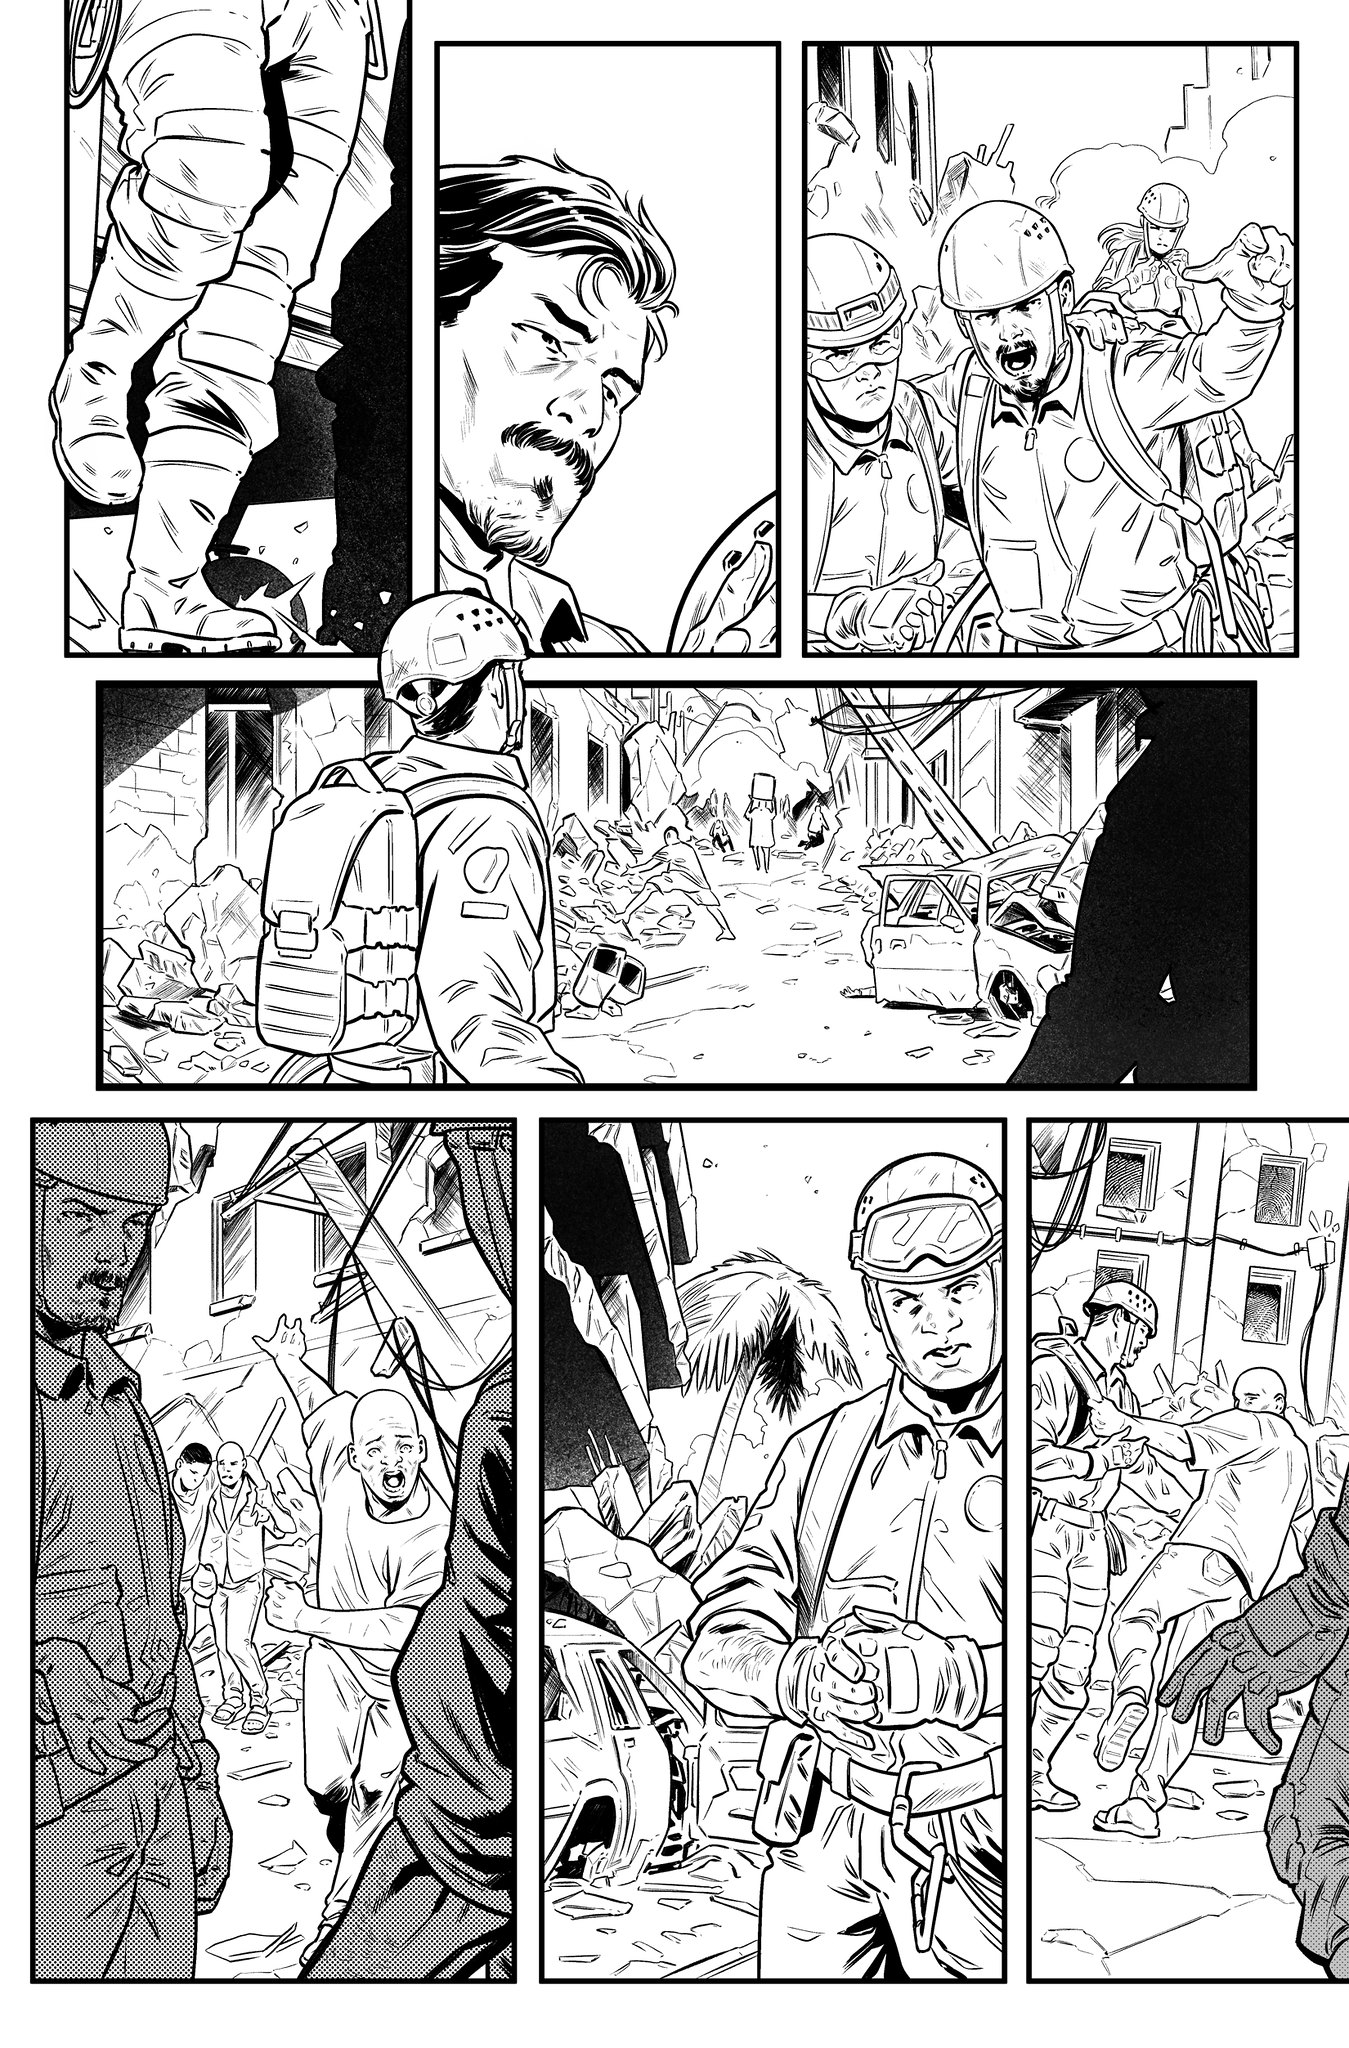 SURVIVAL#1_PAGE2_INKS